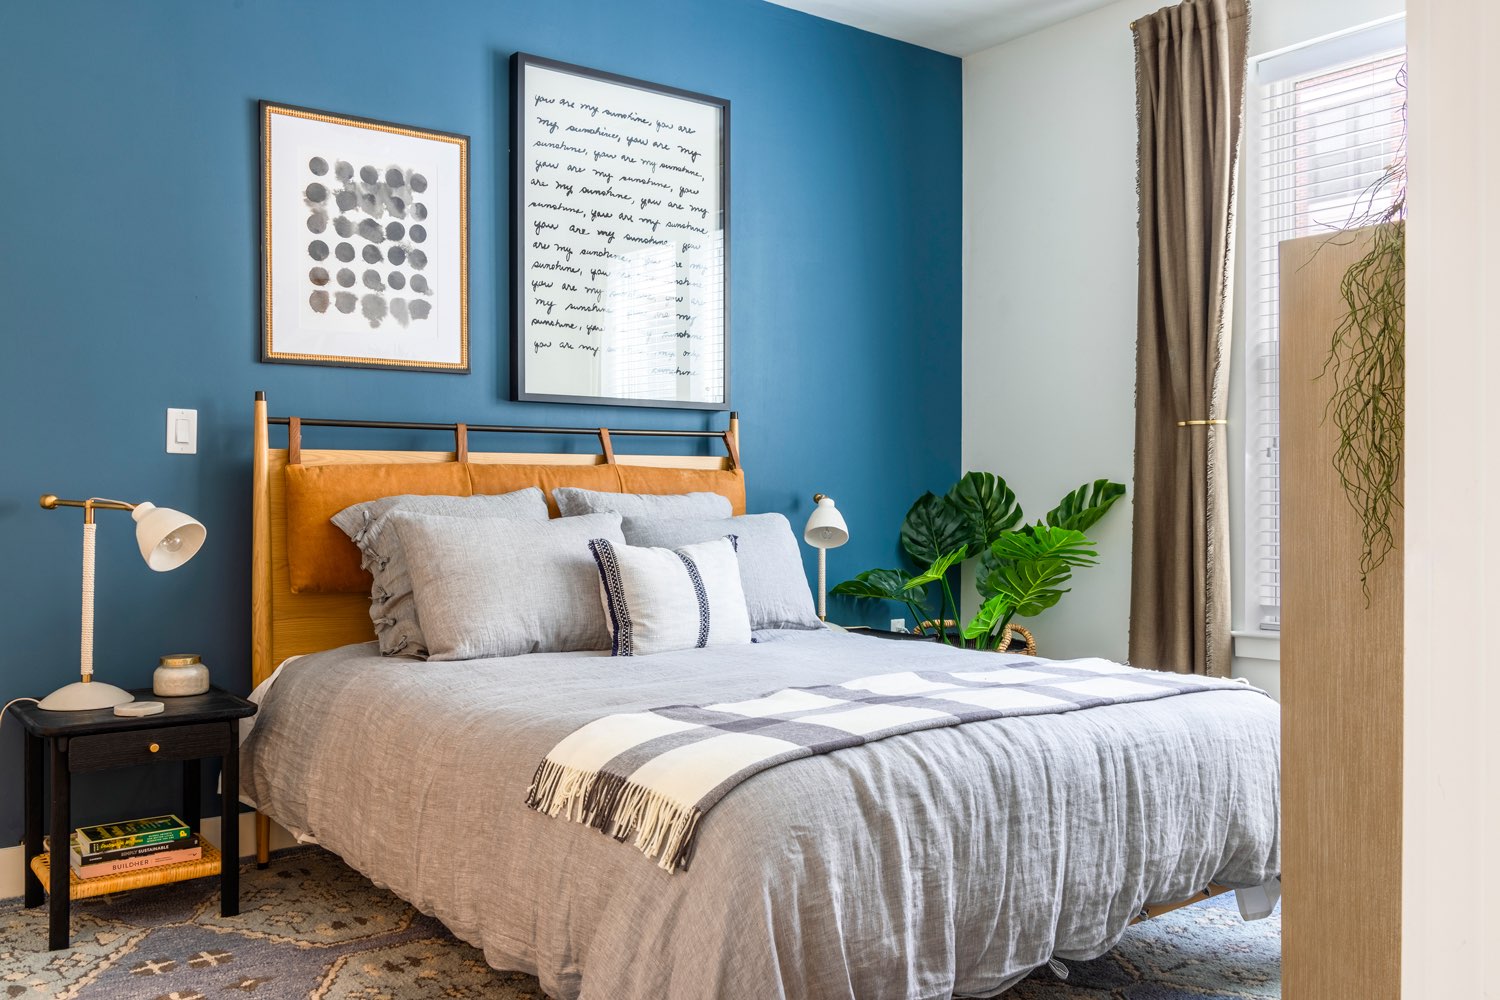 A bedroom with a bold blue wall behind the bed.